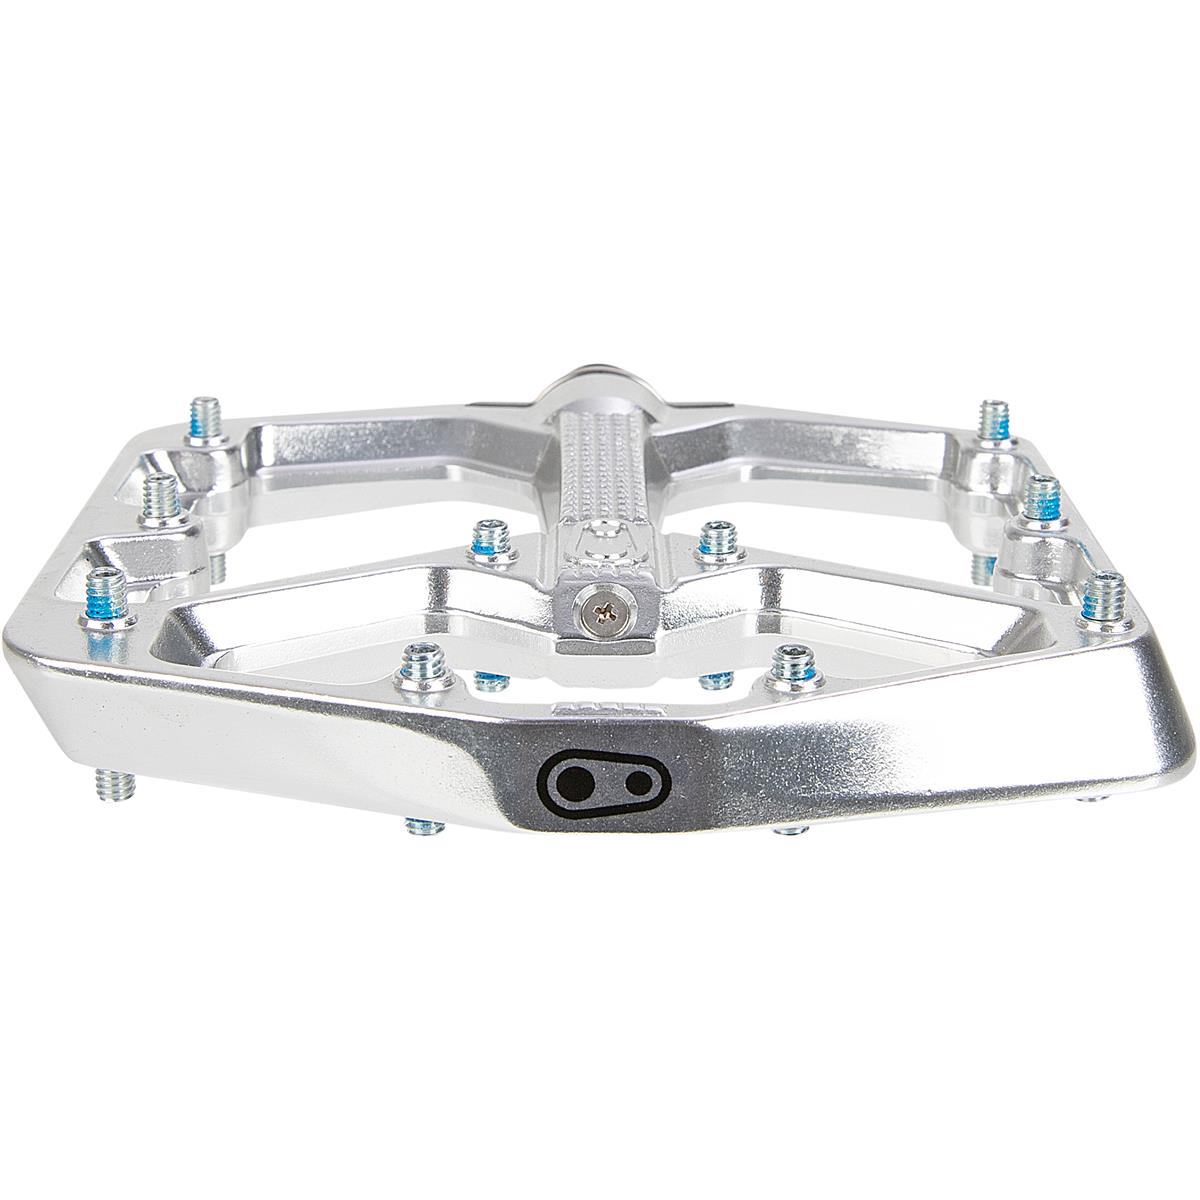 Crankbrothers Stamp 7 Large - Silver Edition Flat Pedals High-Polished  Silver